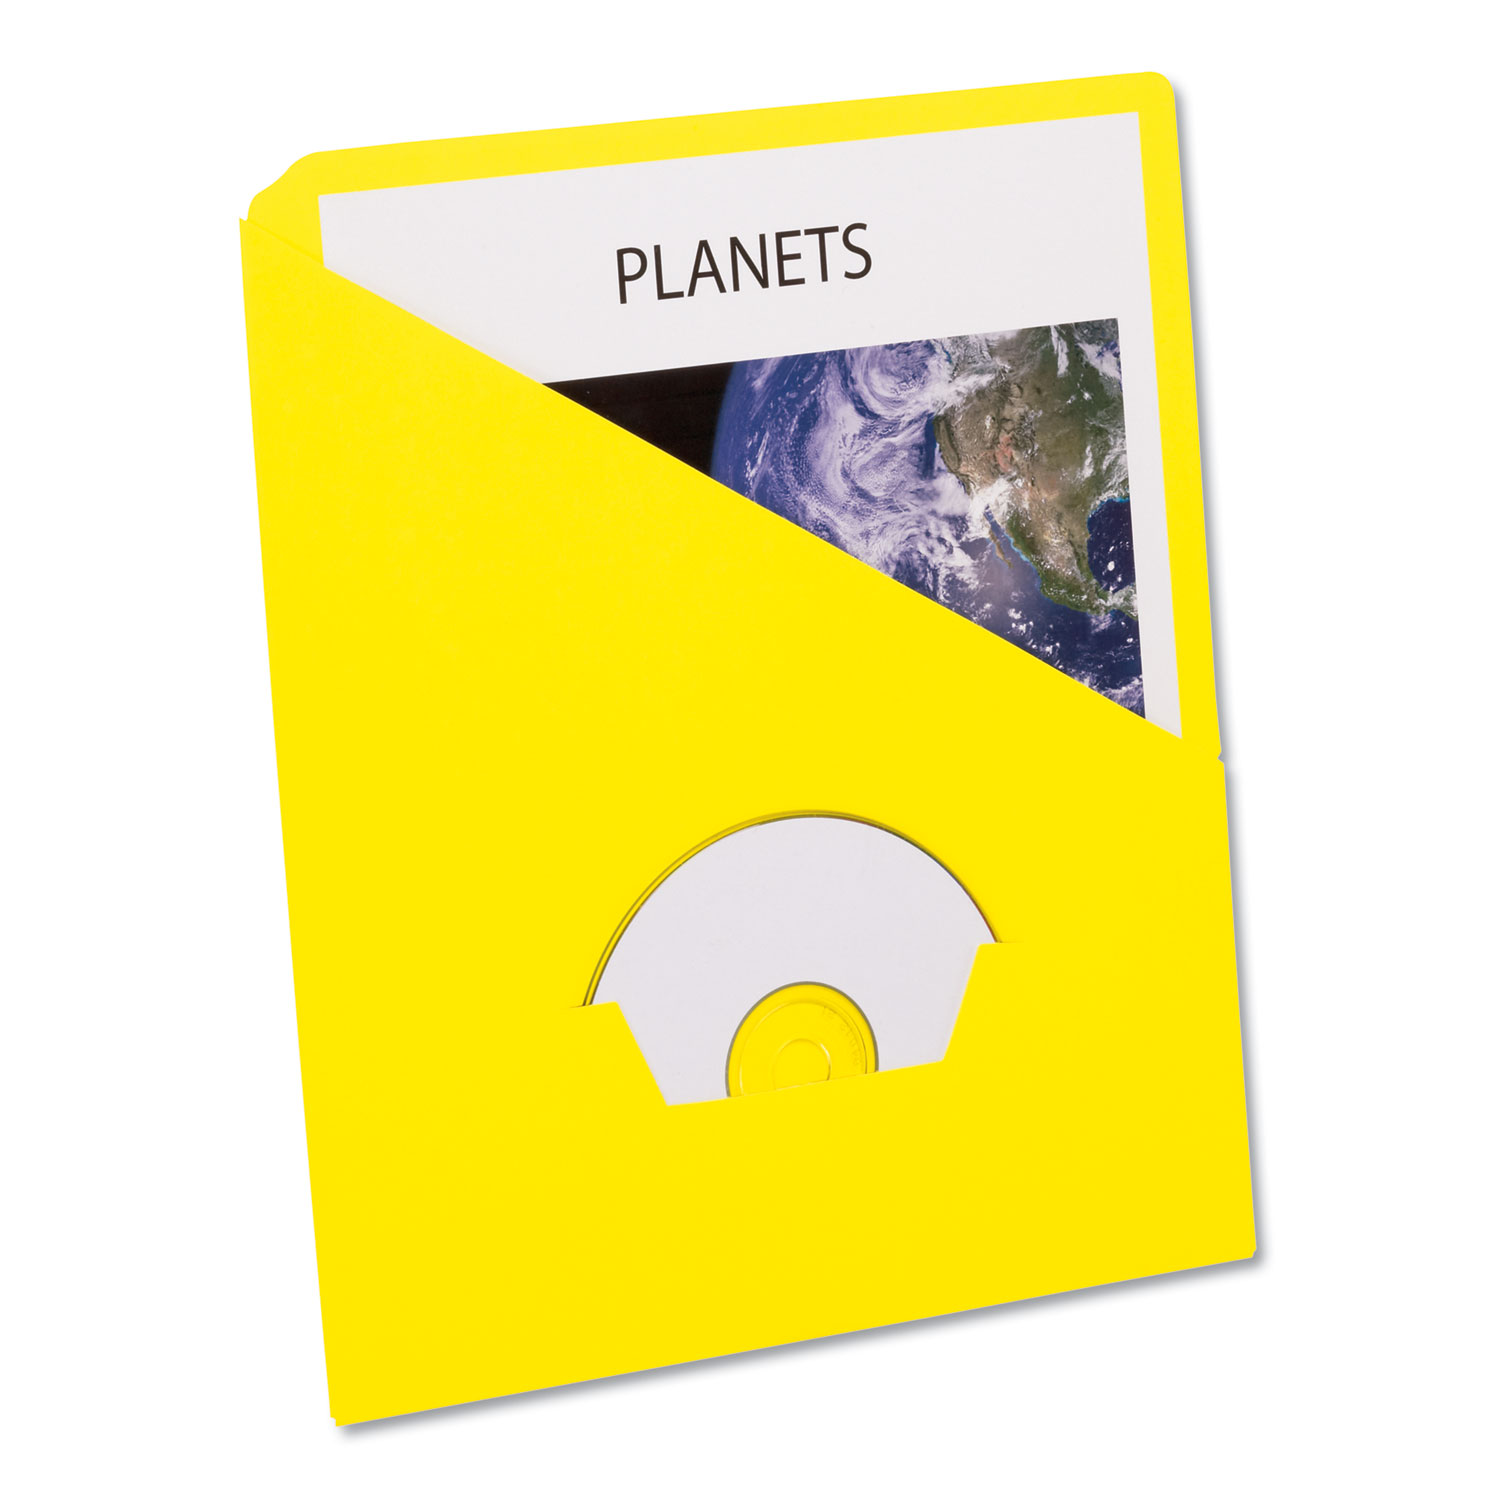  Pendaflex 32909 Slash Pocket Project Folders, 3-Hole Punched, Straight Tab, Letter Size, Yellow, 25/Pack (PFX32909) 